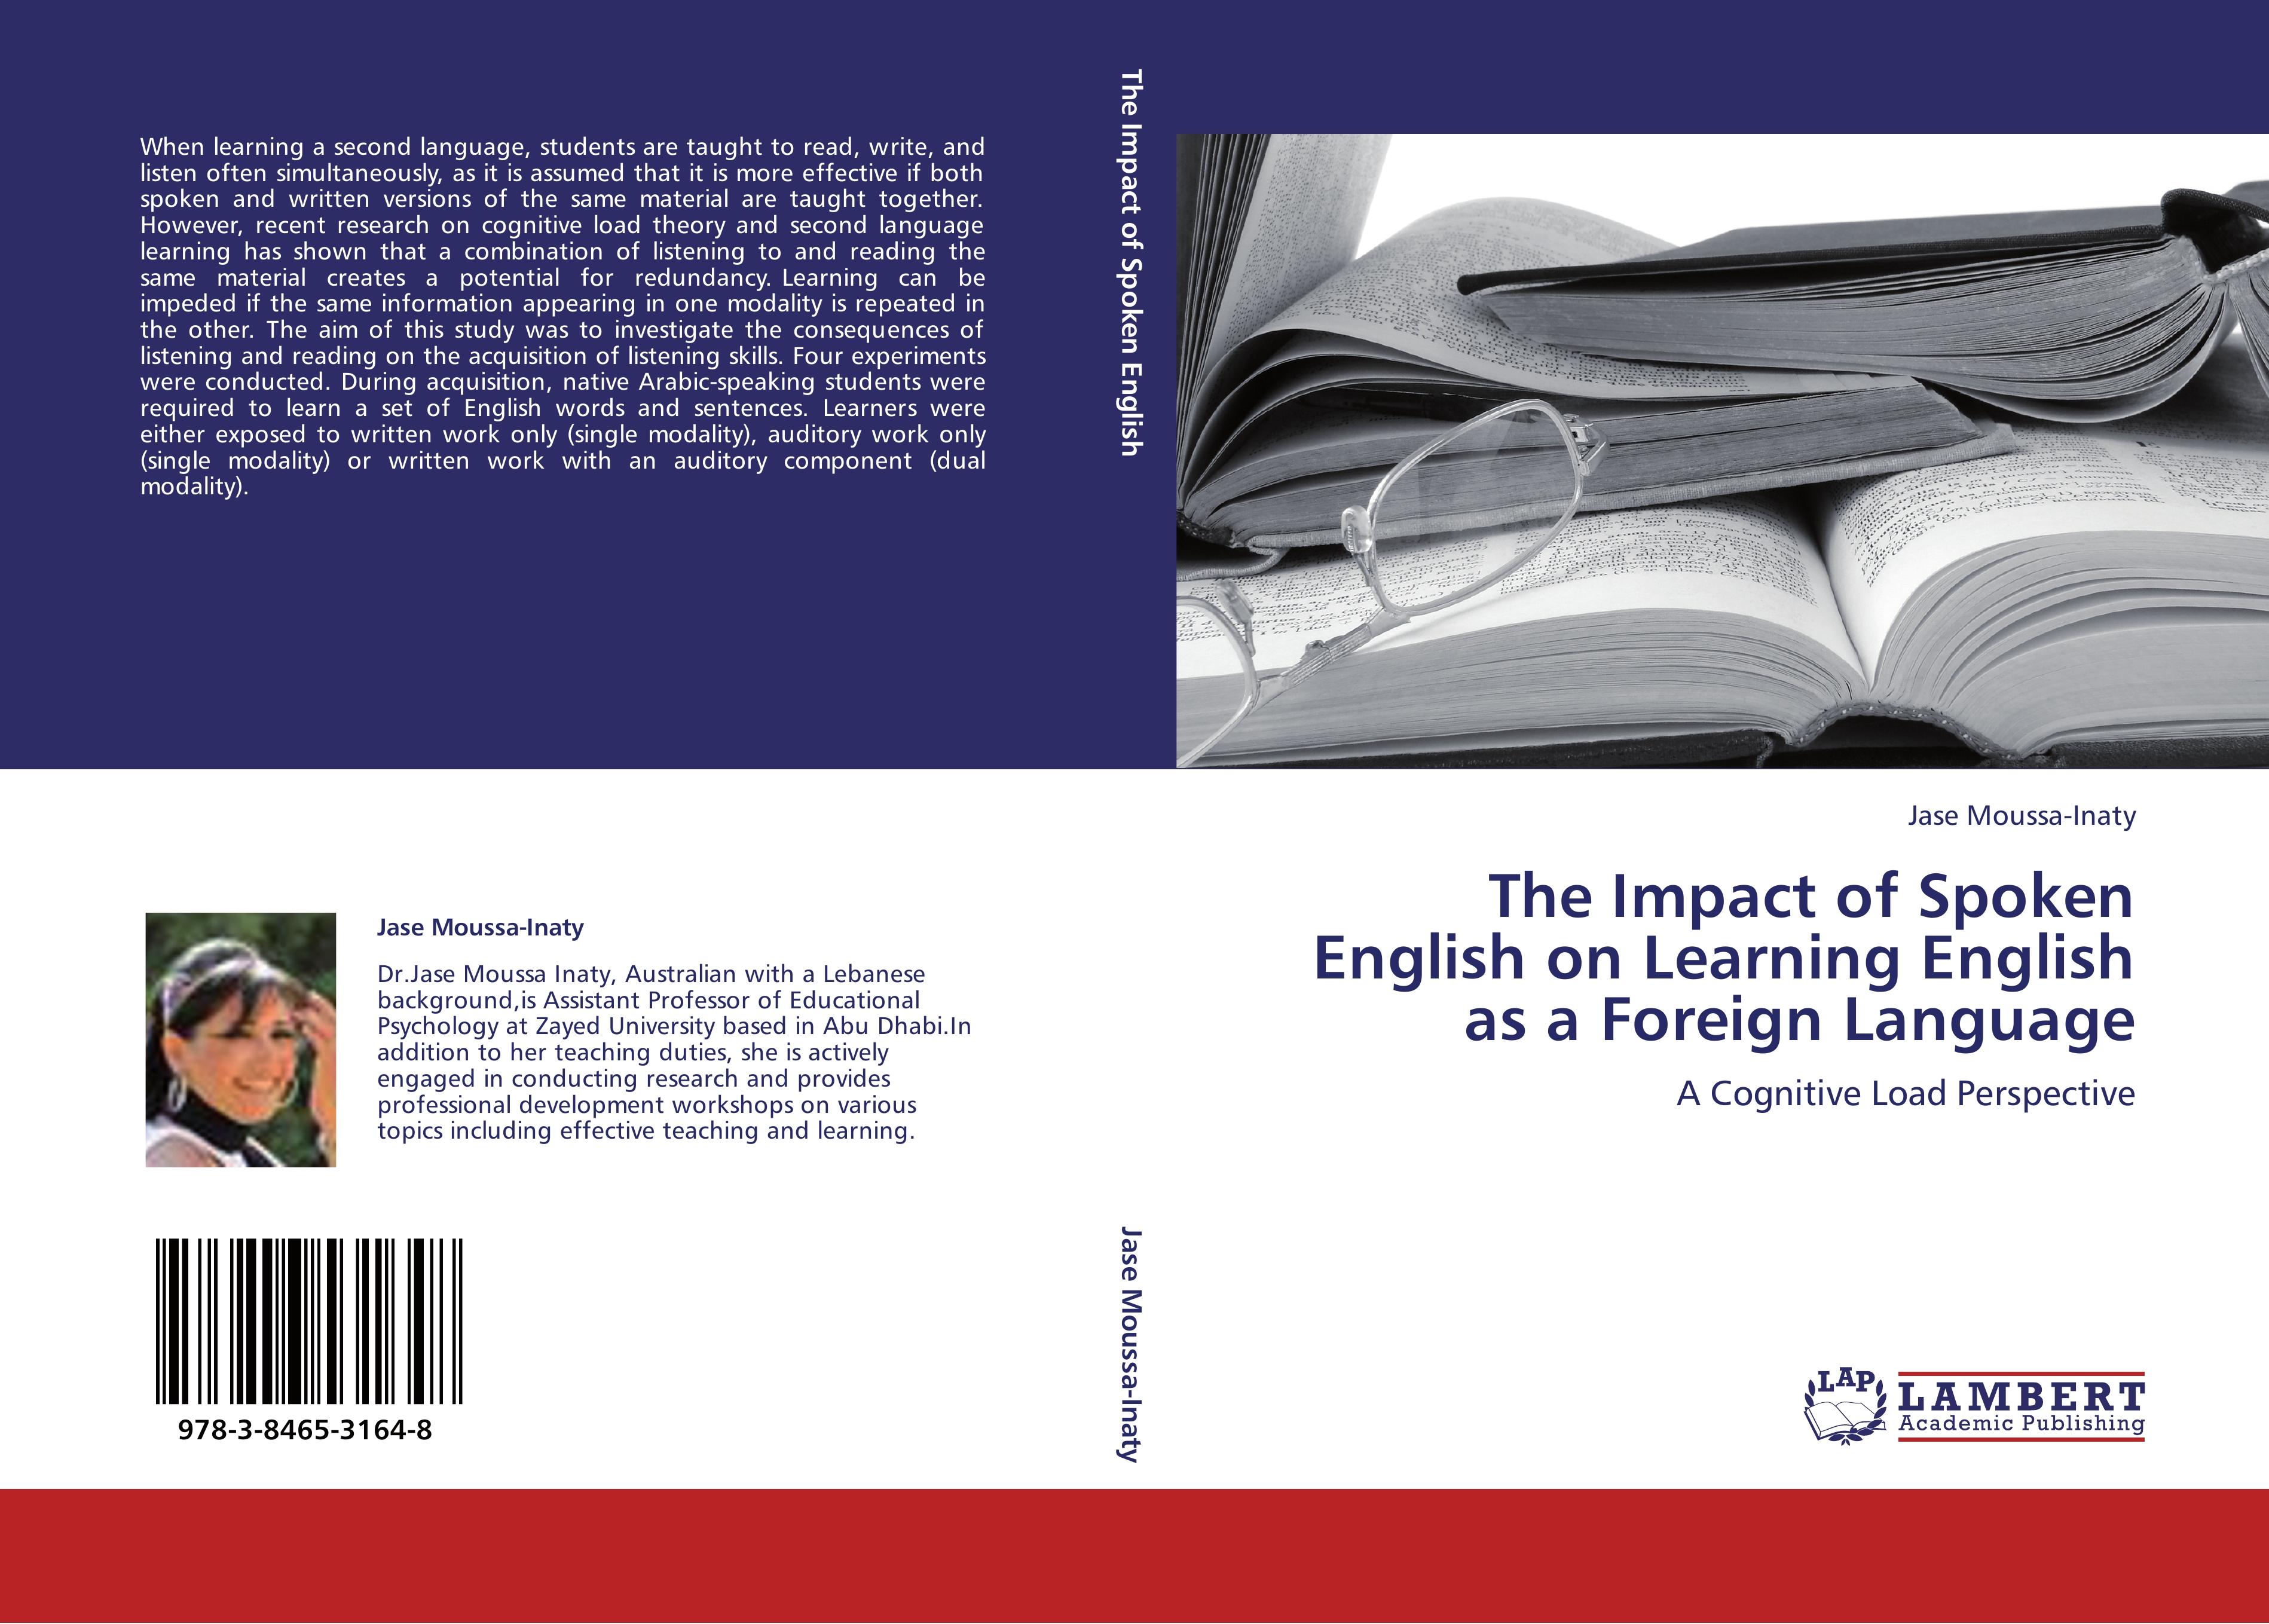 The Impact of Spoken English on Learning English as a Foreign Language - Jase Moussa-Inaty